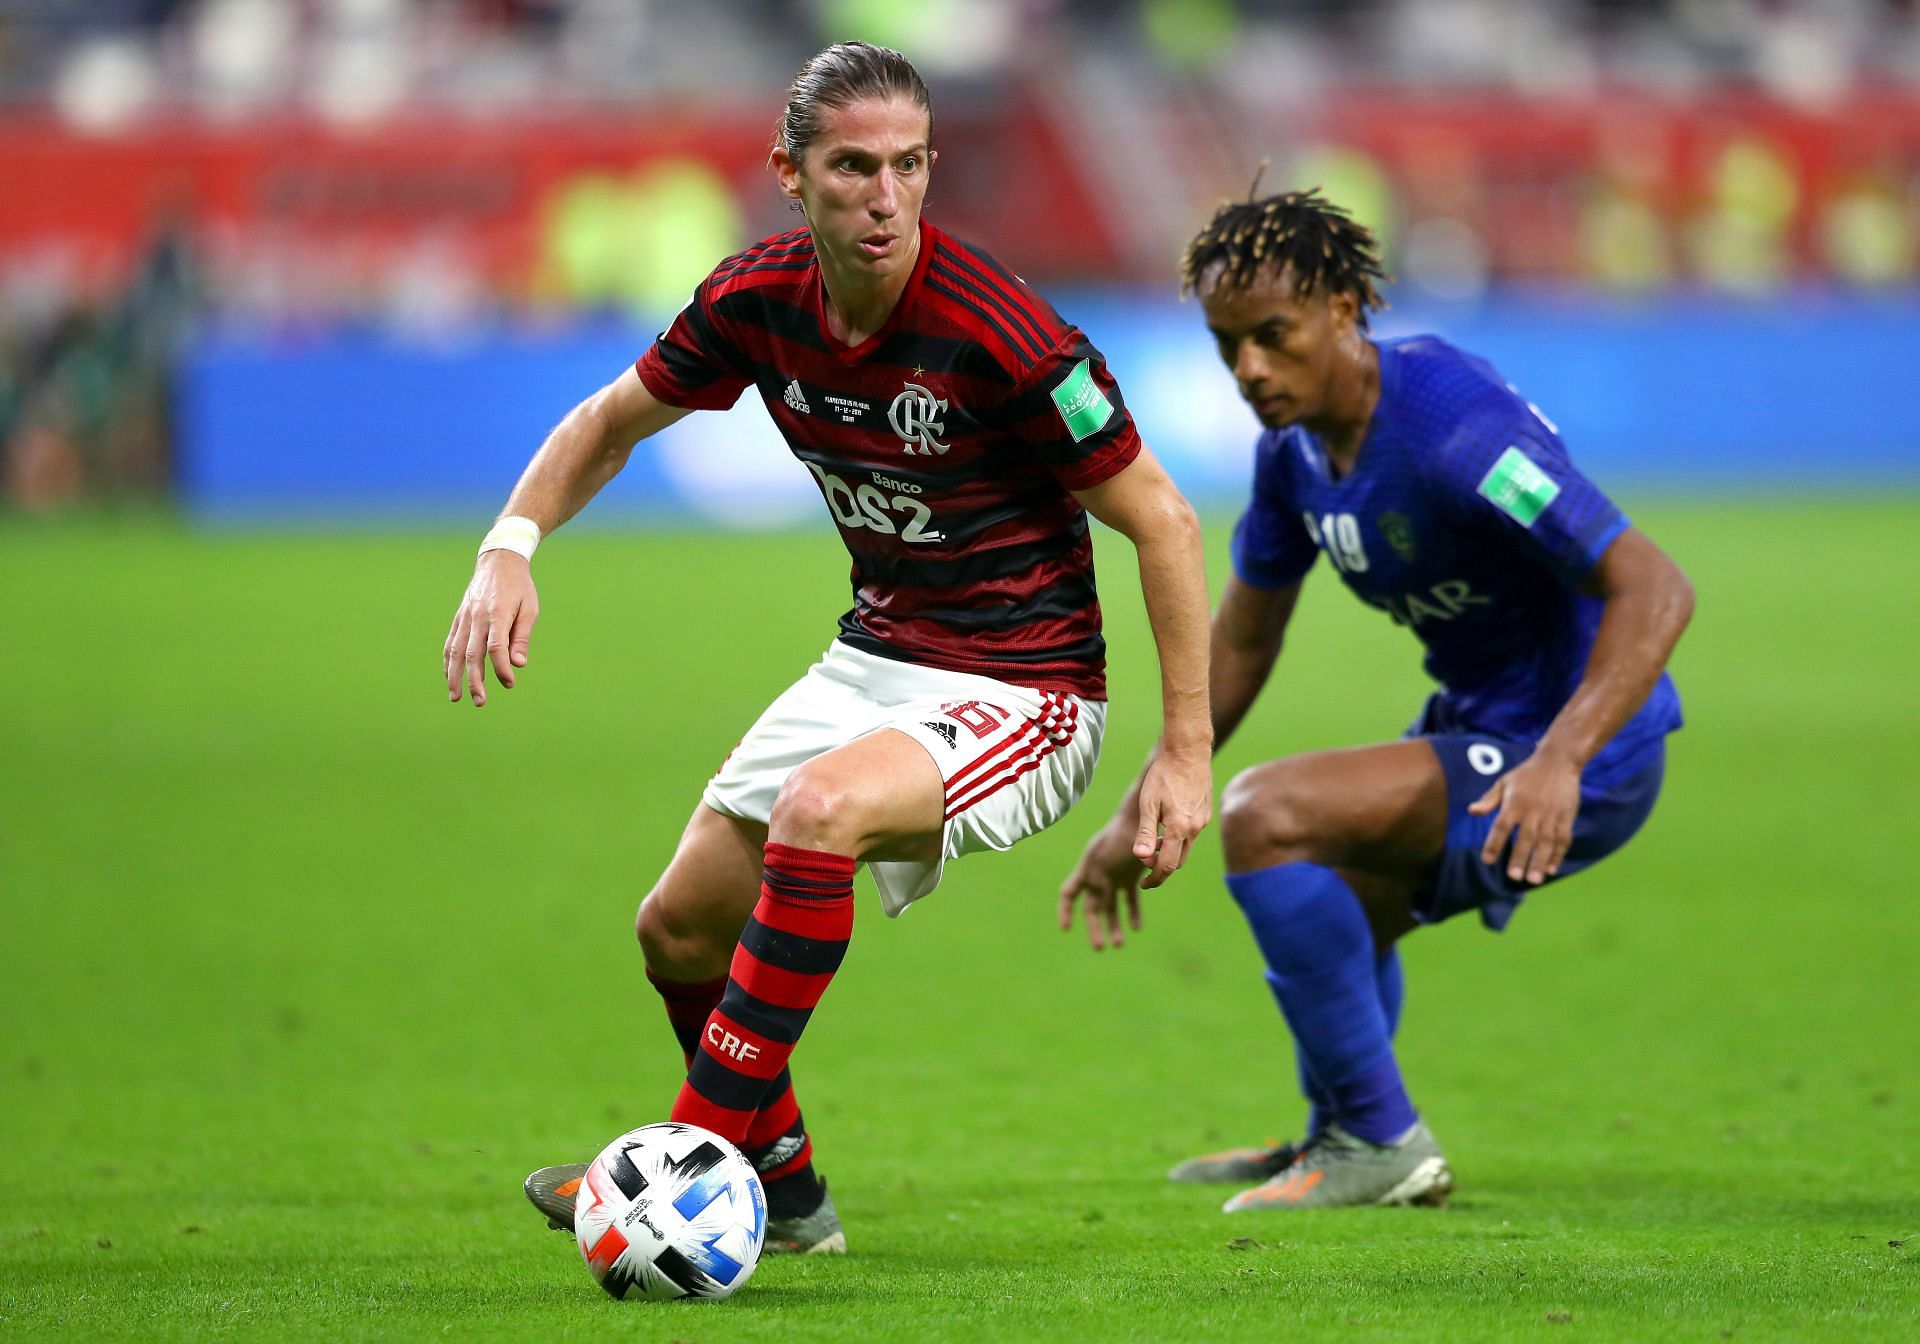 Filipe Luis will be a huge miss for Flamengo